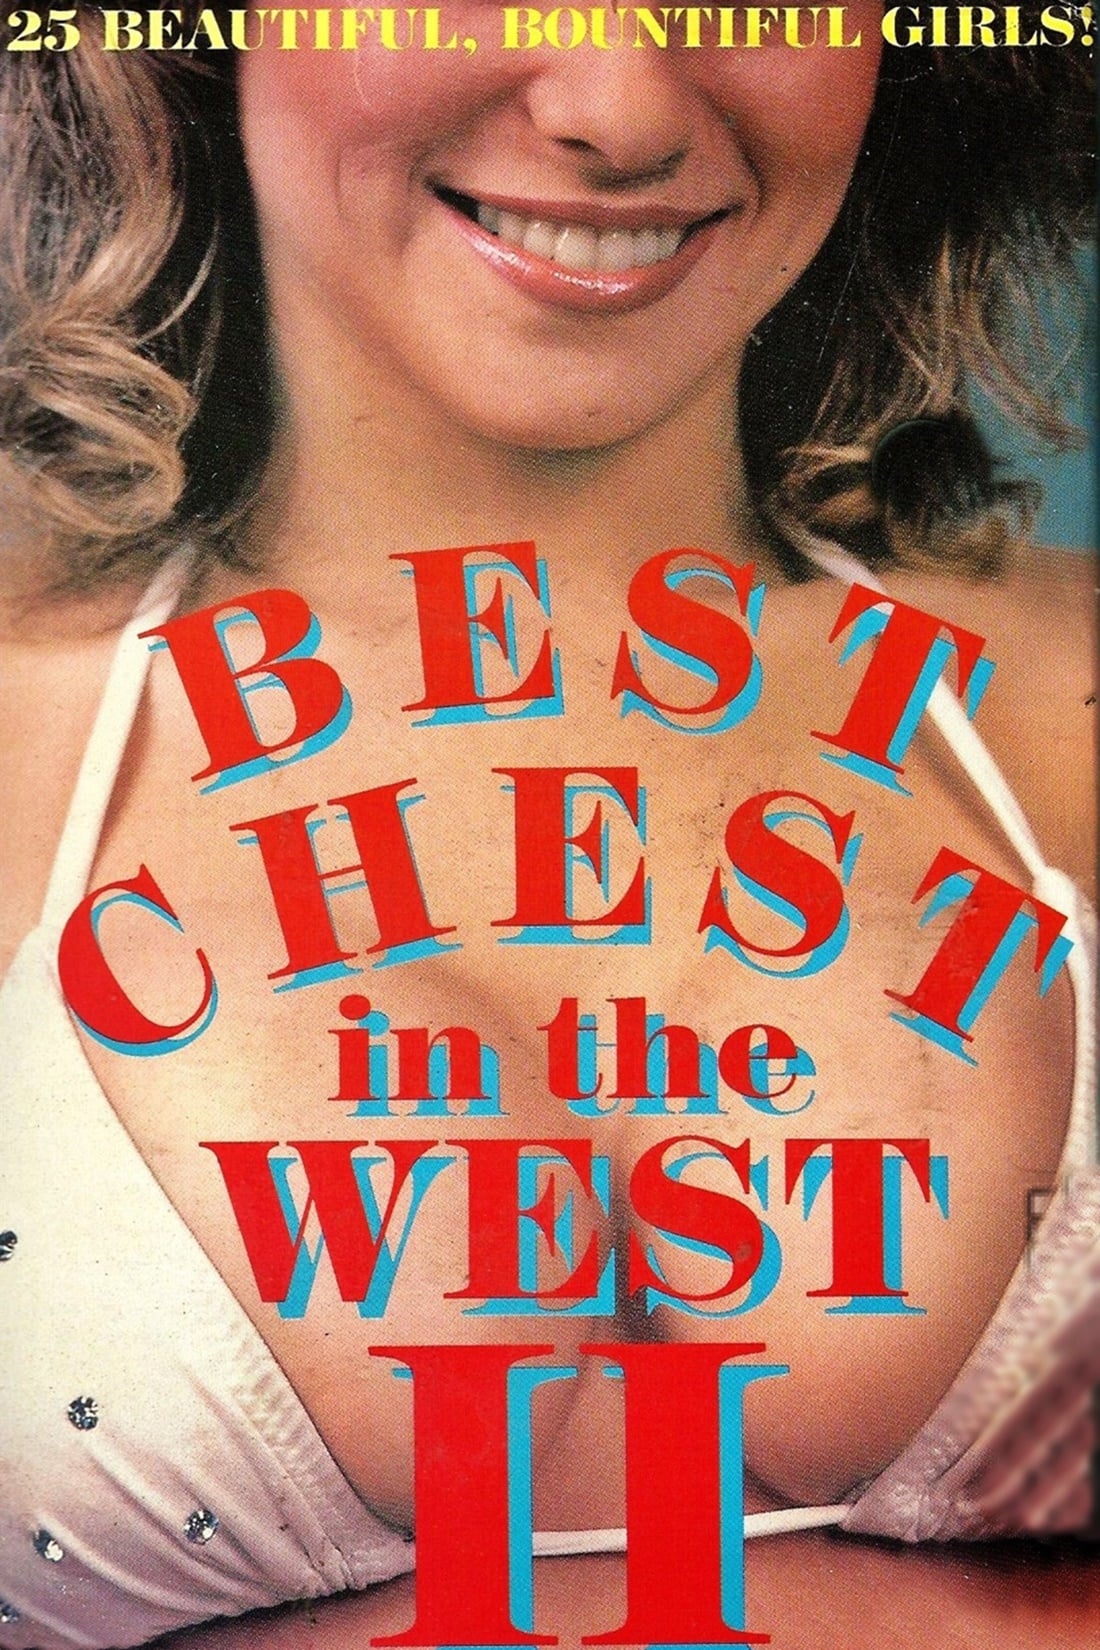 Best Chest in the West II